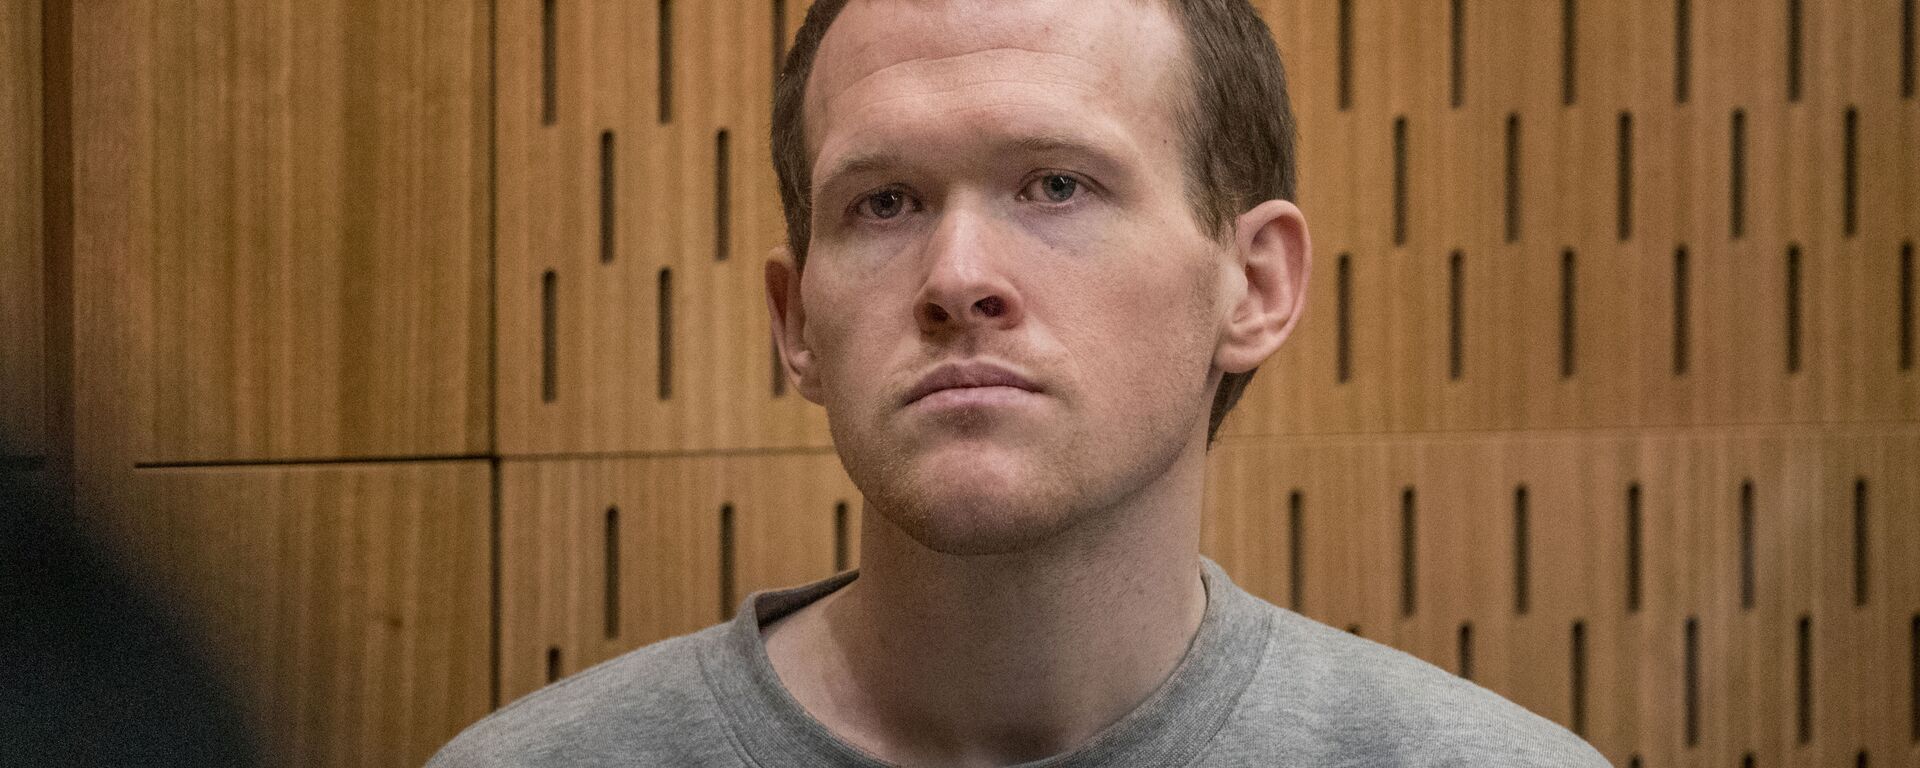 Brenton Tarrant, the gunman who shot and killed worshippers in the Christchurch mosque attacks, listens as Crown prosecutor Mark Zarifeh delivers his submission during Tarrant's sentencing at the High Court in Christchurch, New Zealand, August 27, 2020 - Sputnik International, 1920, 27.08.2020